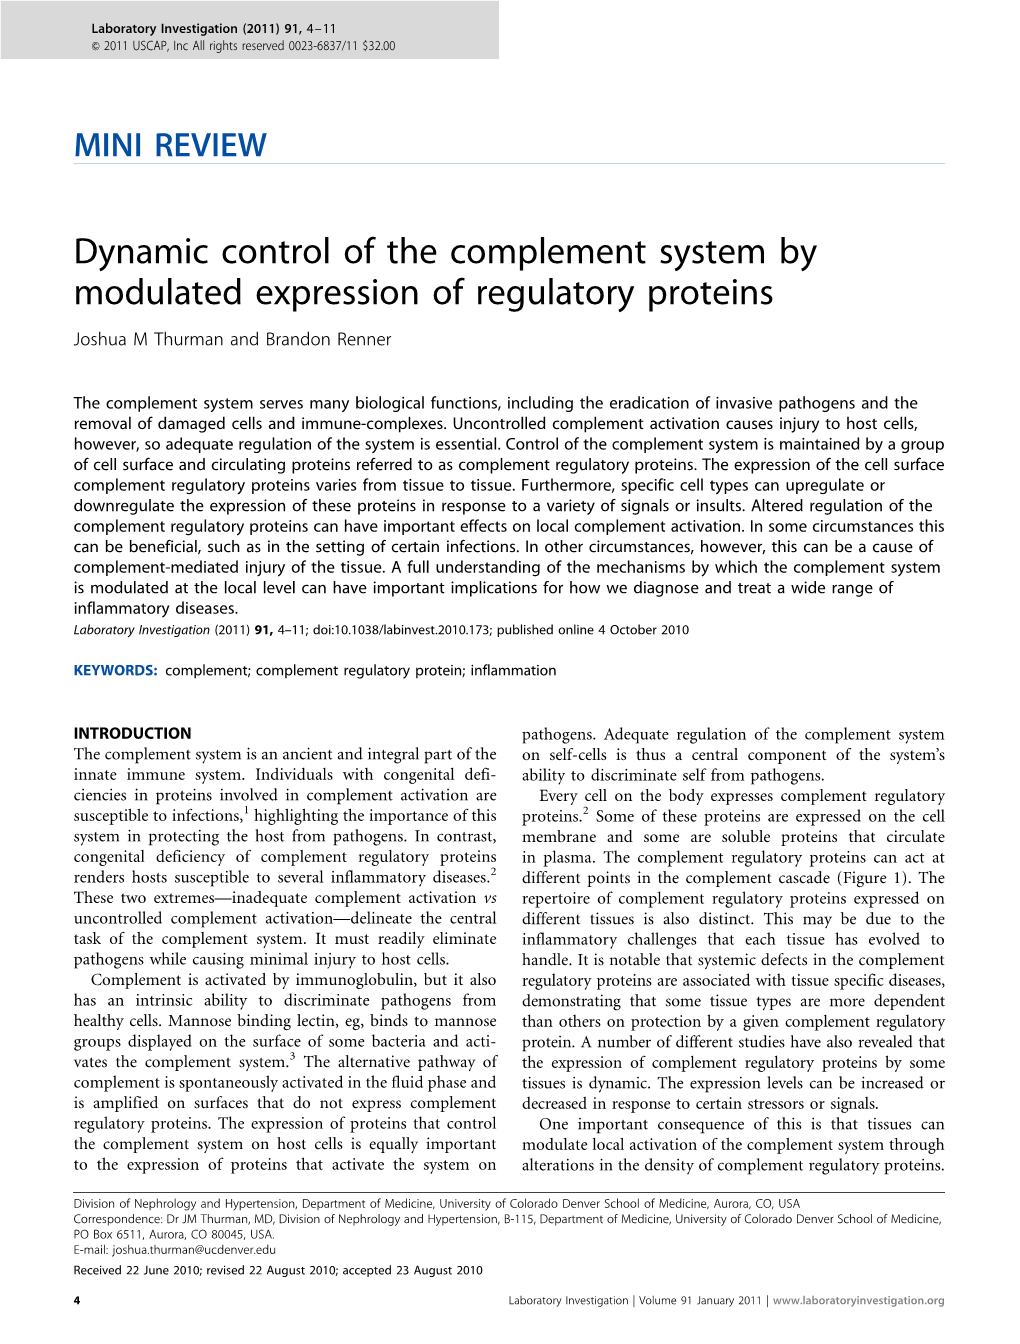 Dynamic Control of the Complement System by Modulated Expression of Regulatory Proteins Joshua M Thurman and Brandon Renner